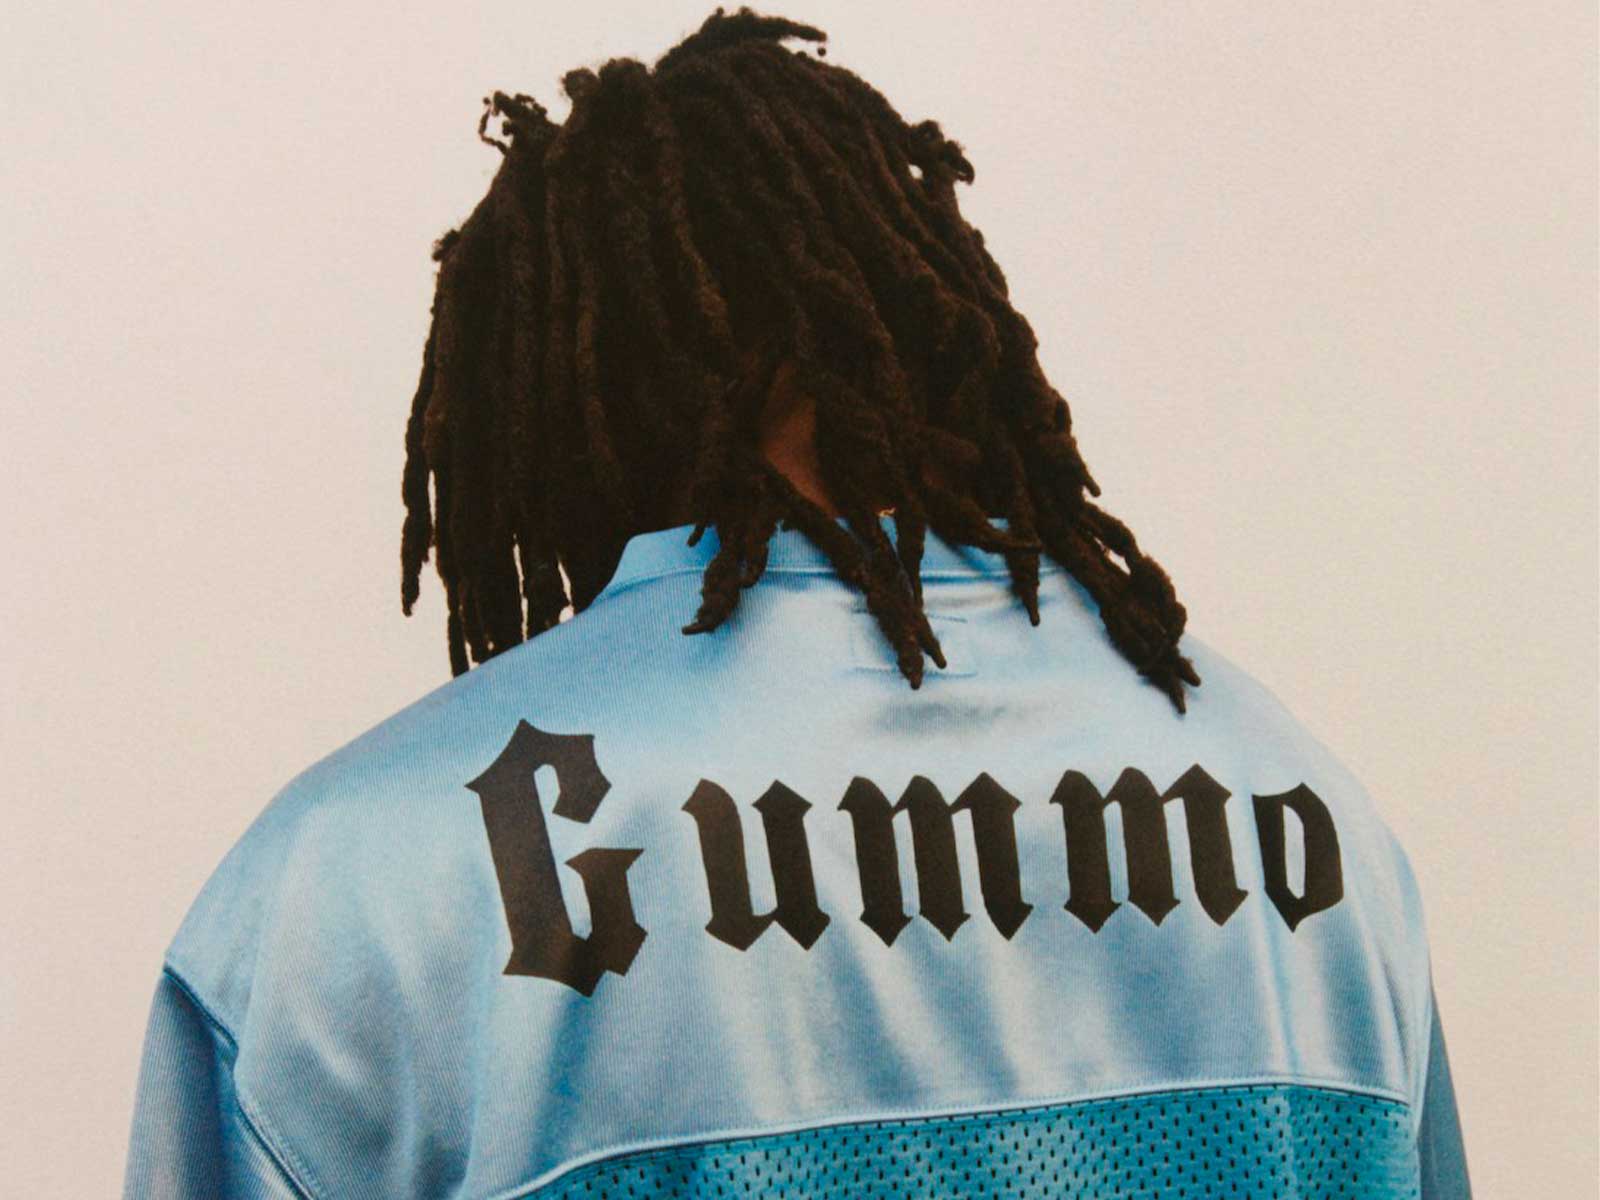 Supreme takes inspiration from ‘Gummo’ for latest release